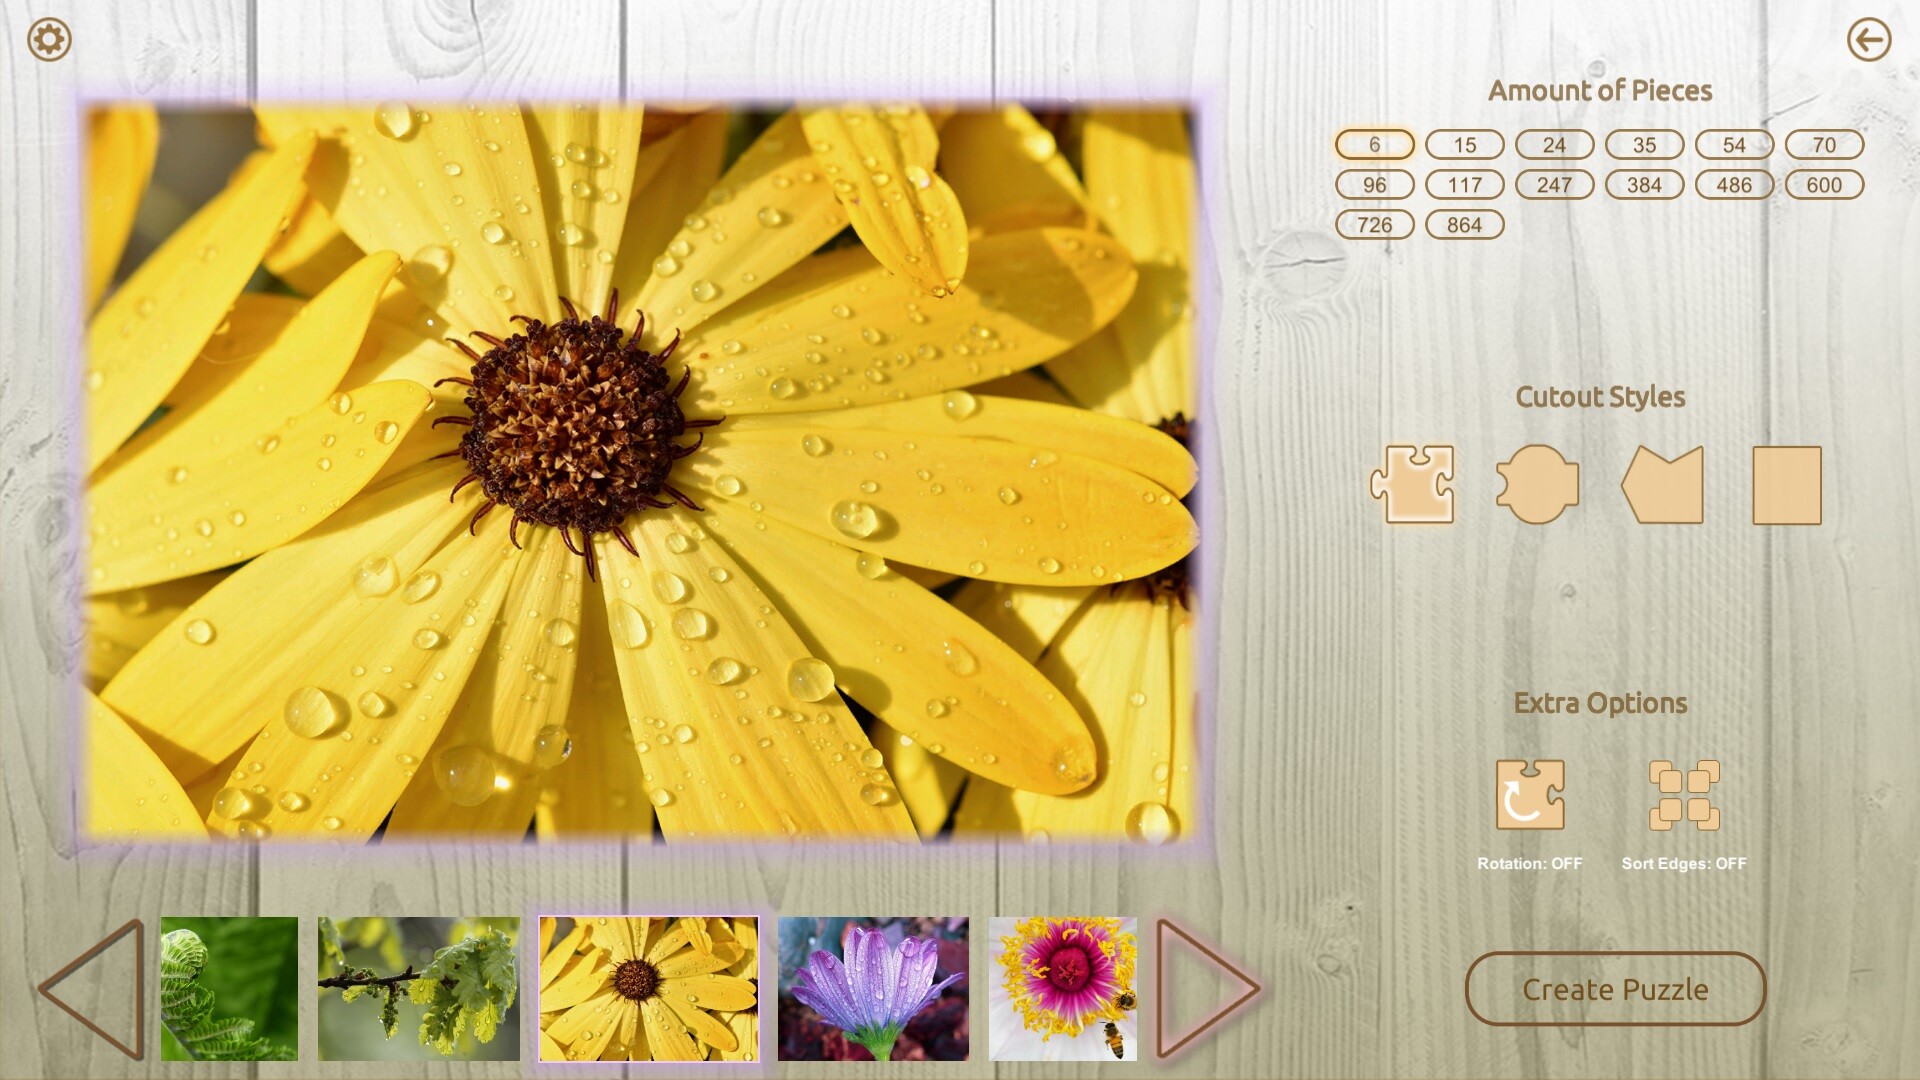 House of Jigsaw: The Best of Macro Photography Featured Screenshot #1